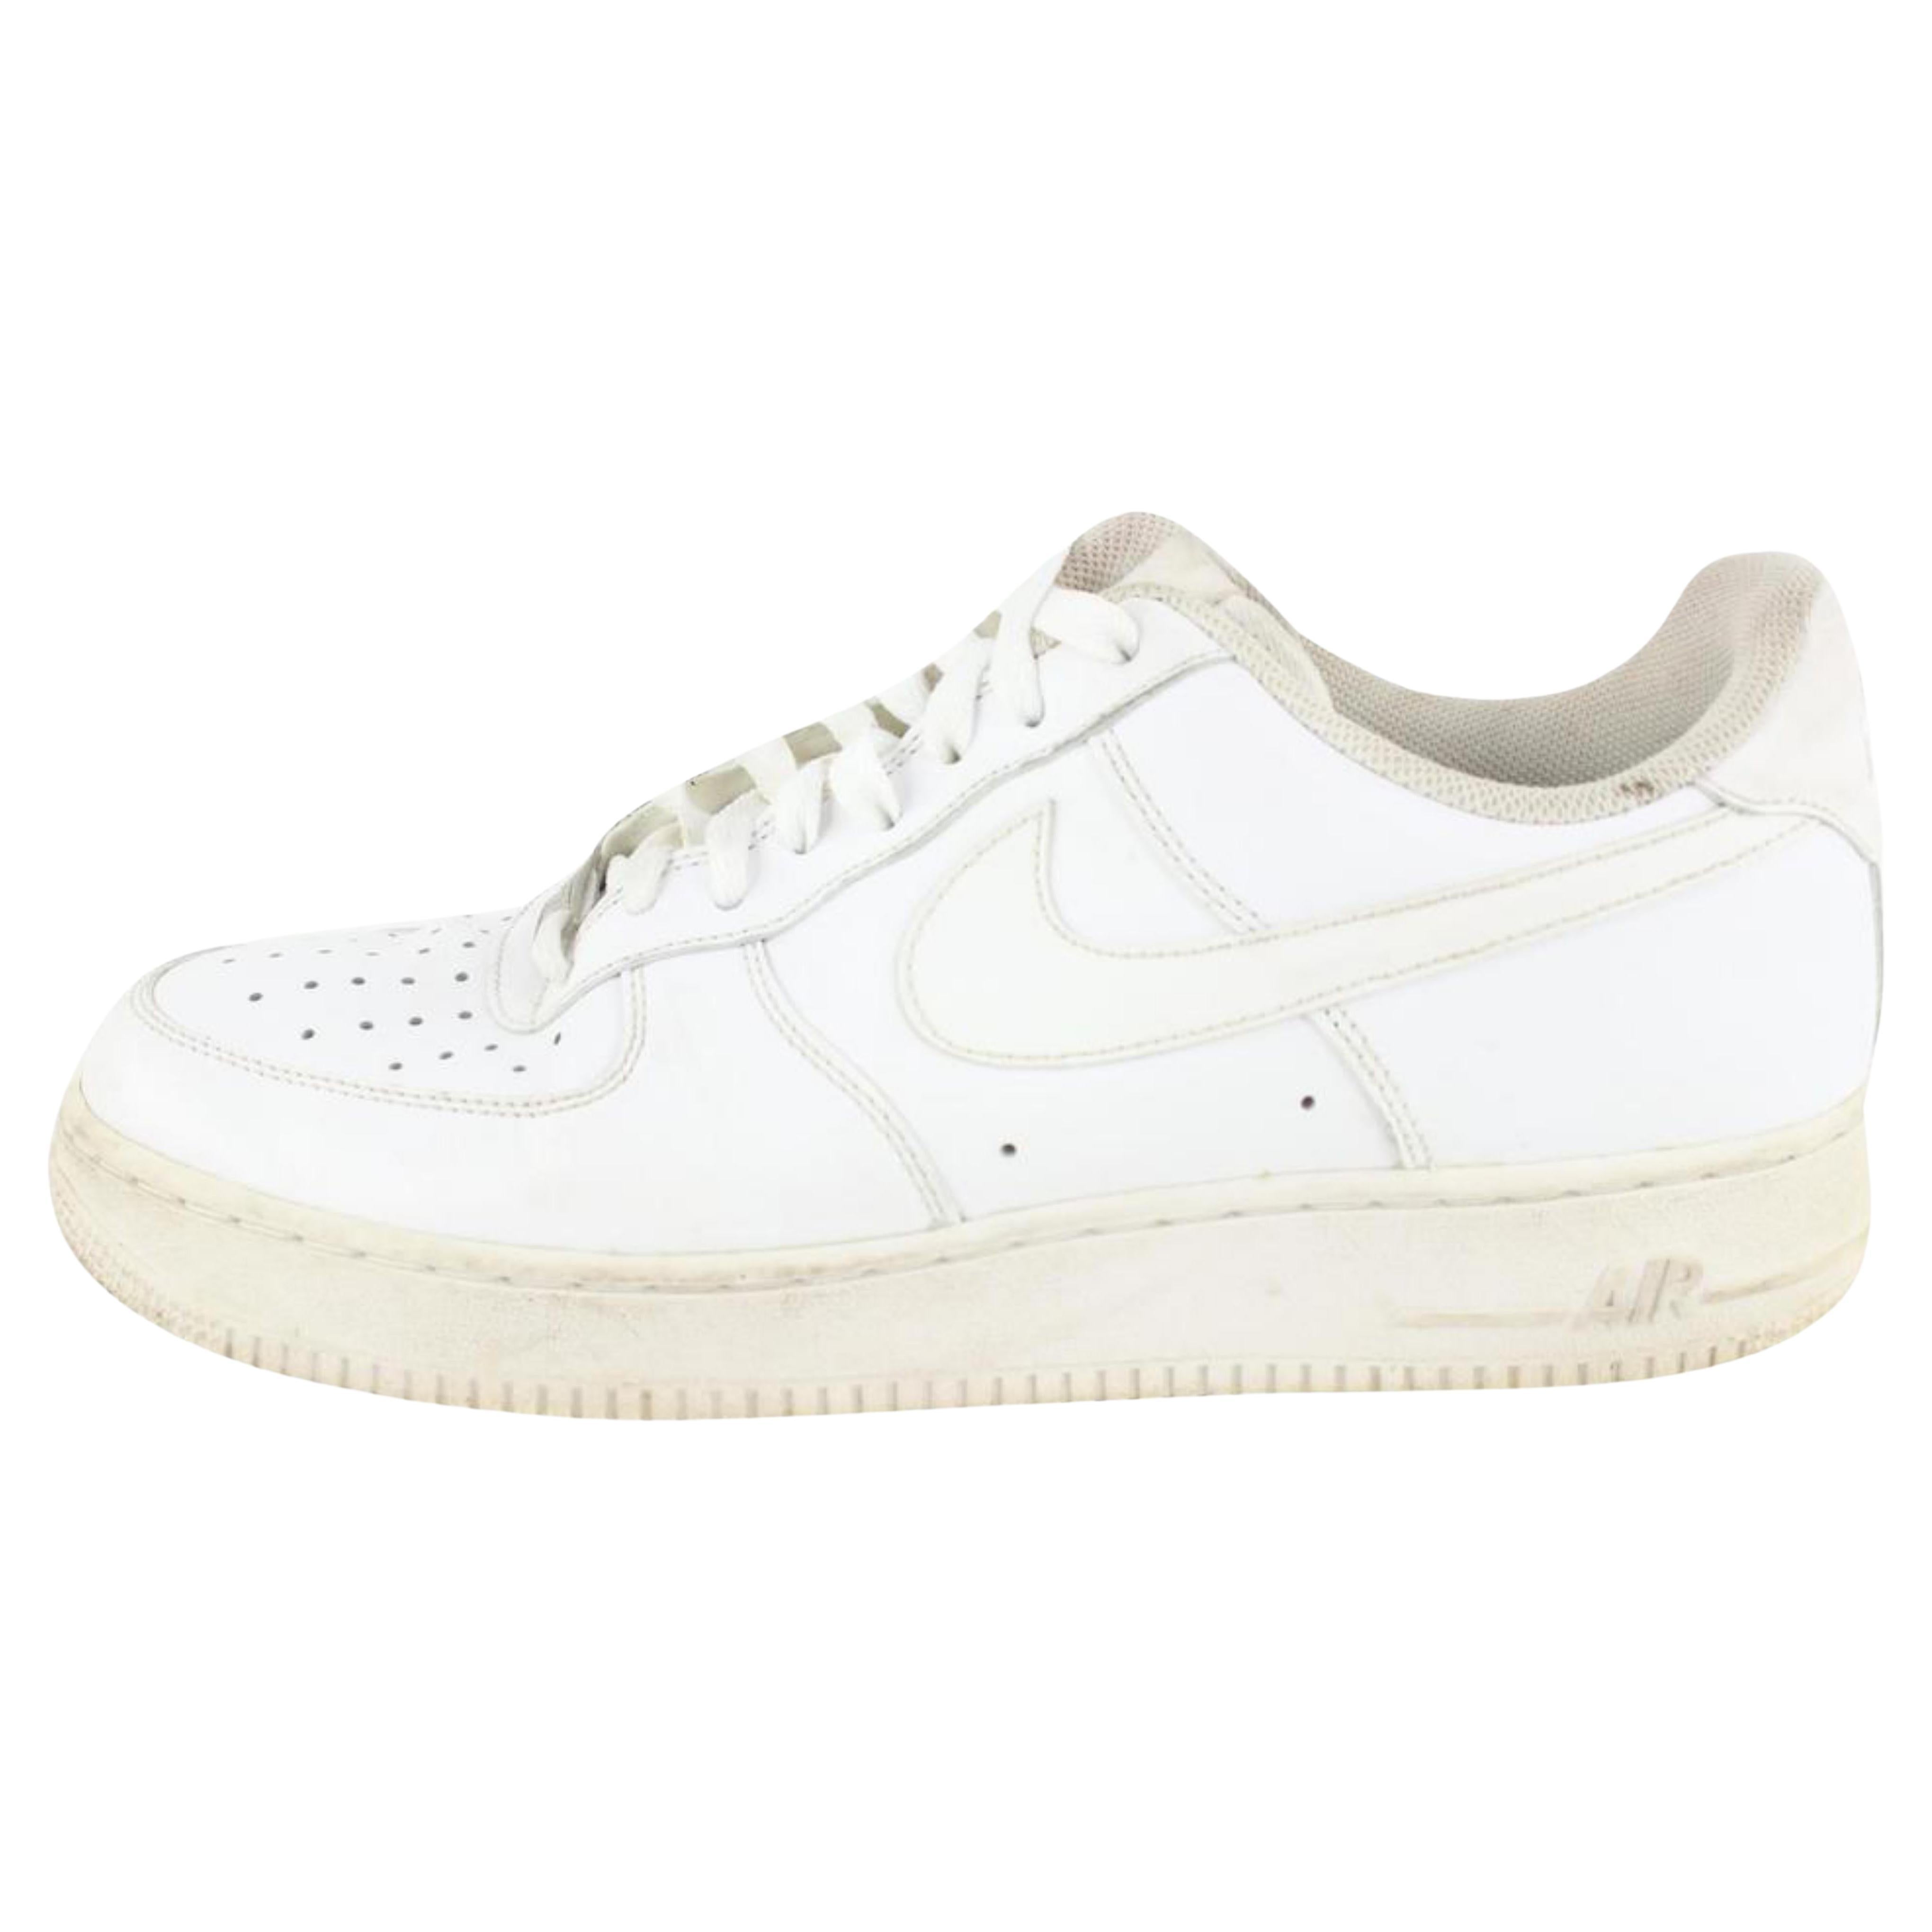 Nike Air Force Shoes - 8 For Sale on 1stDibs